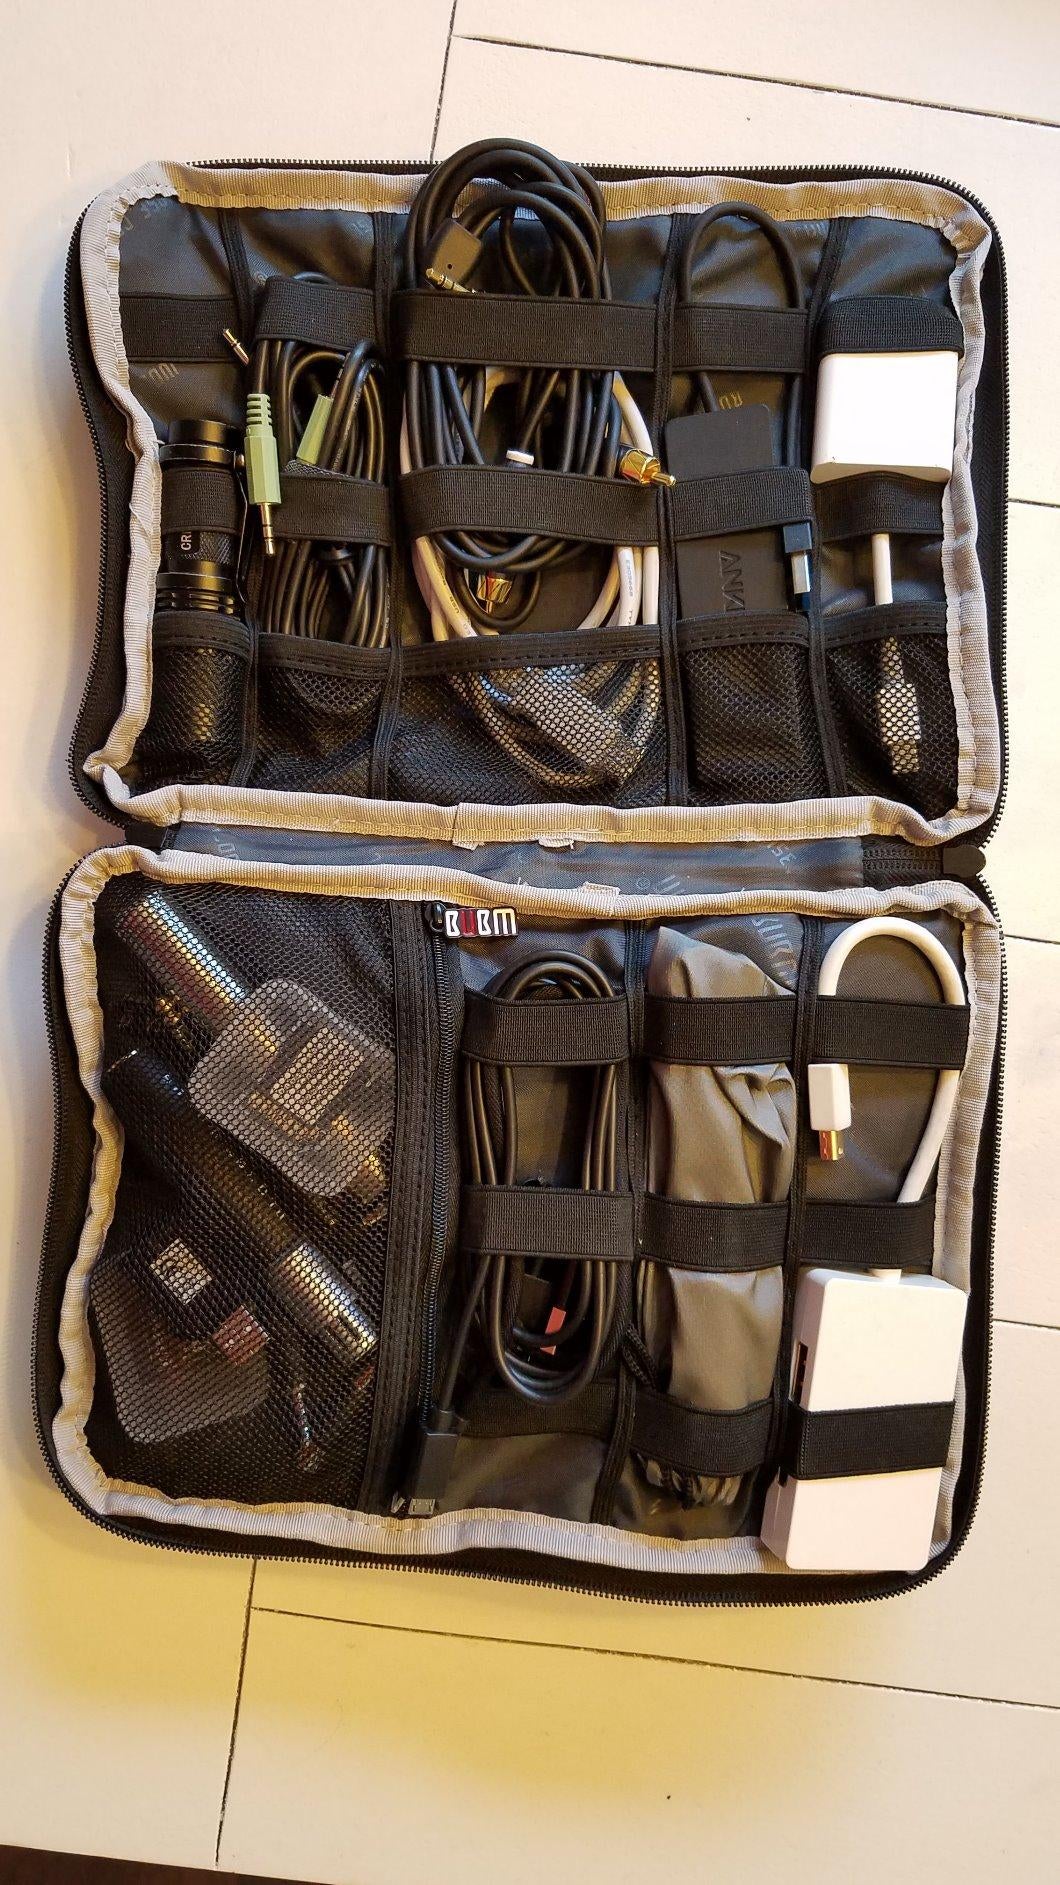 Reviewer's tech organizer filled with cables and chargers